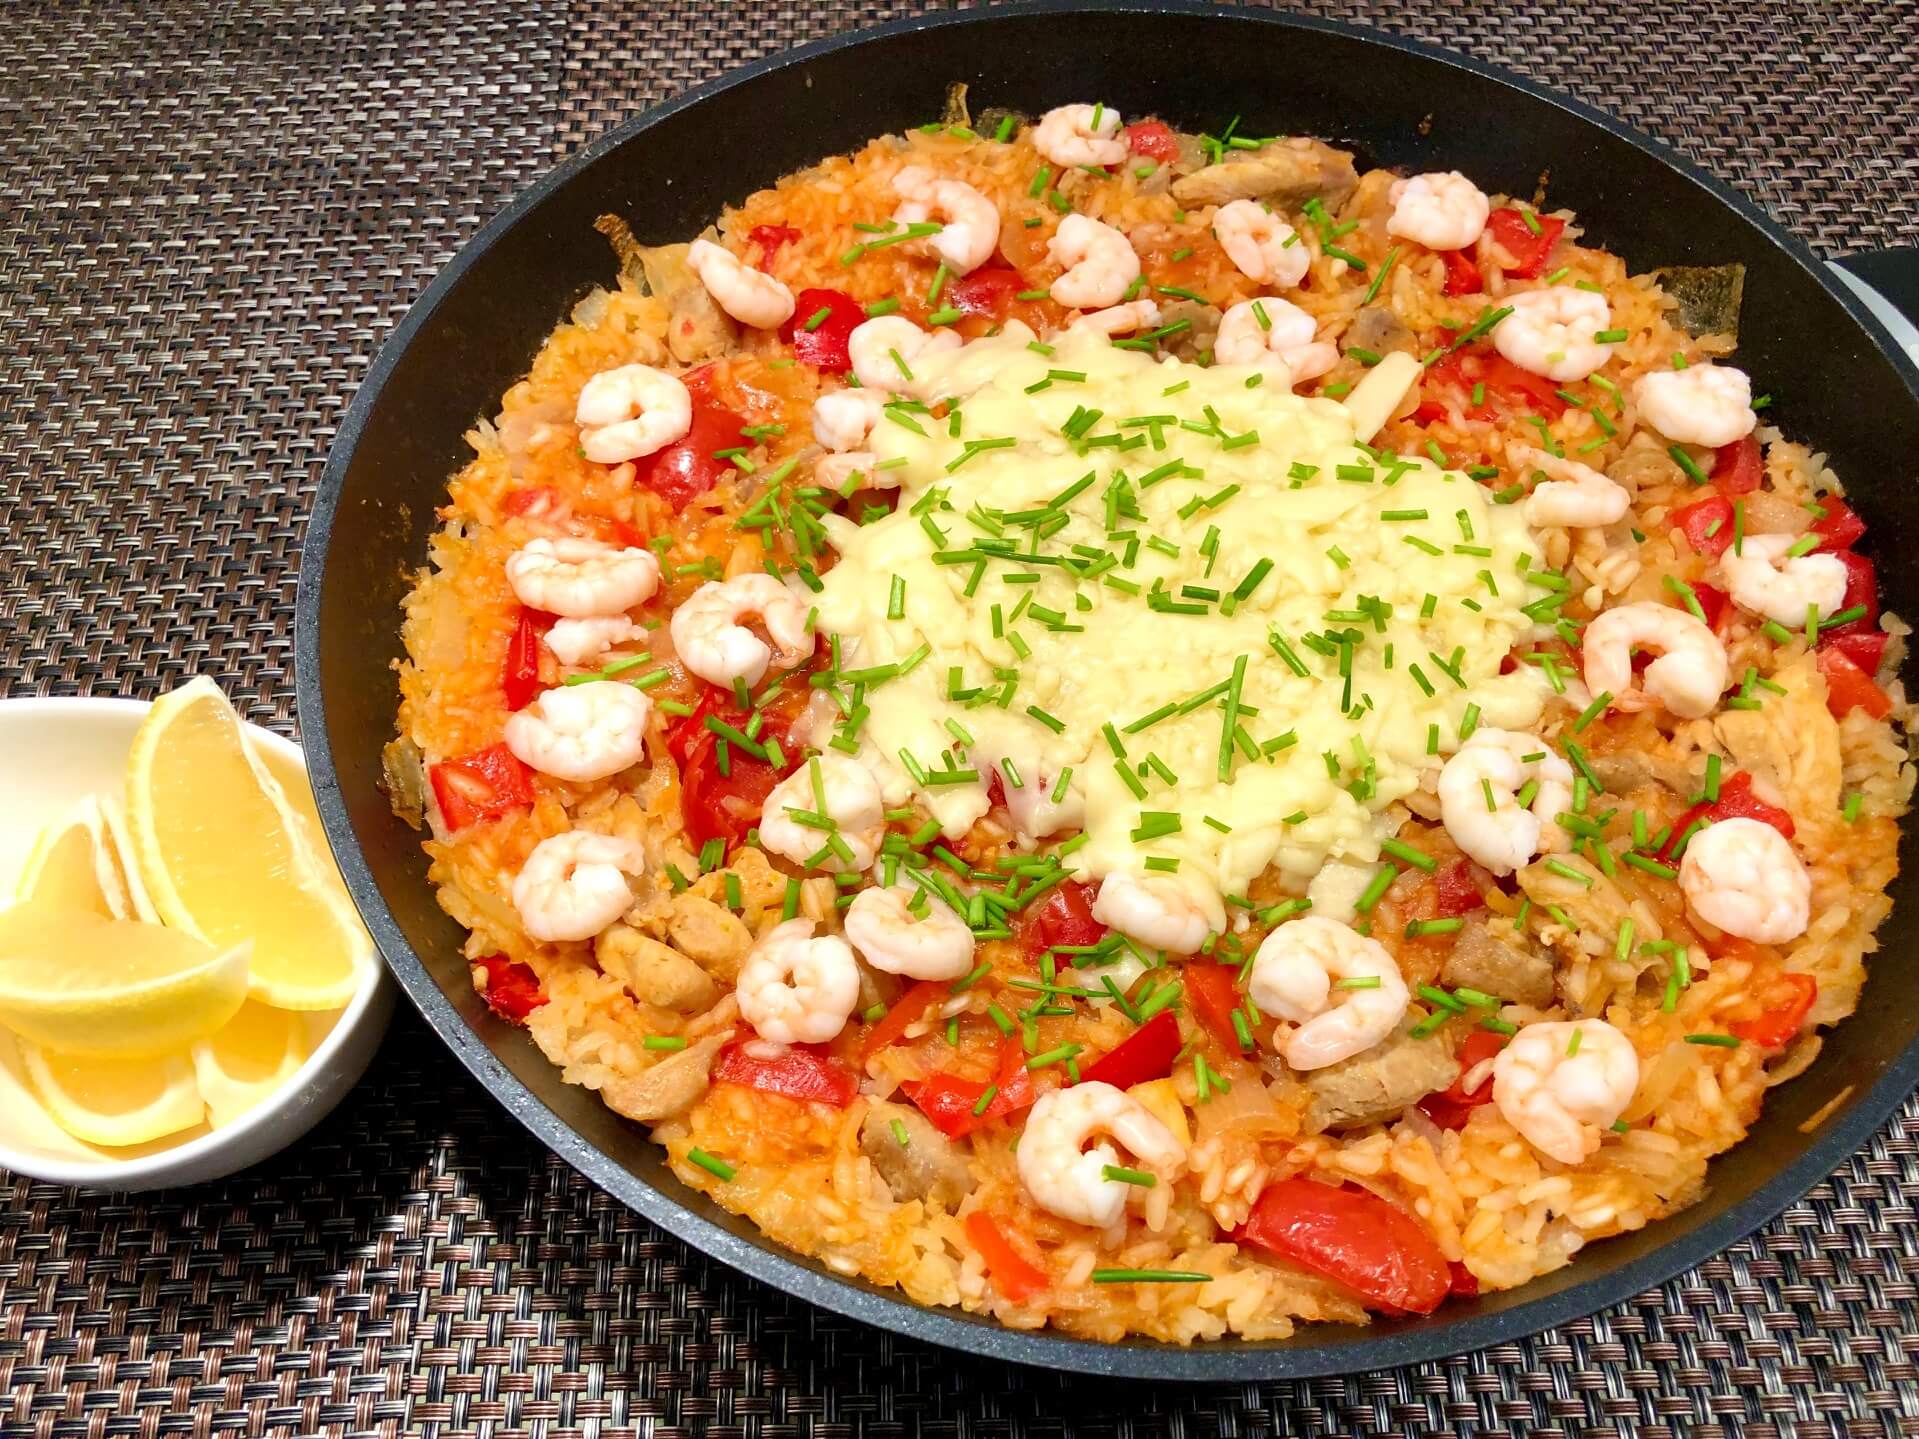 Cheese paella with chicken and shrimp